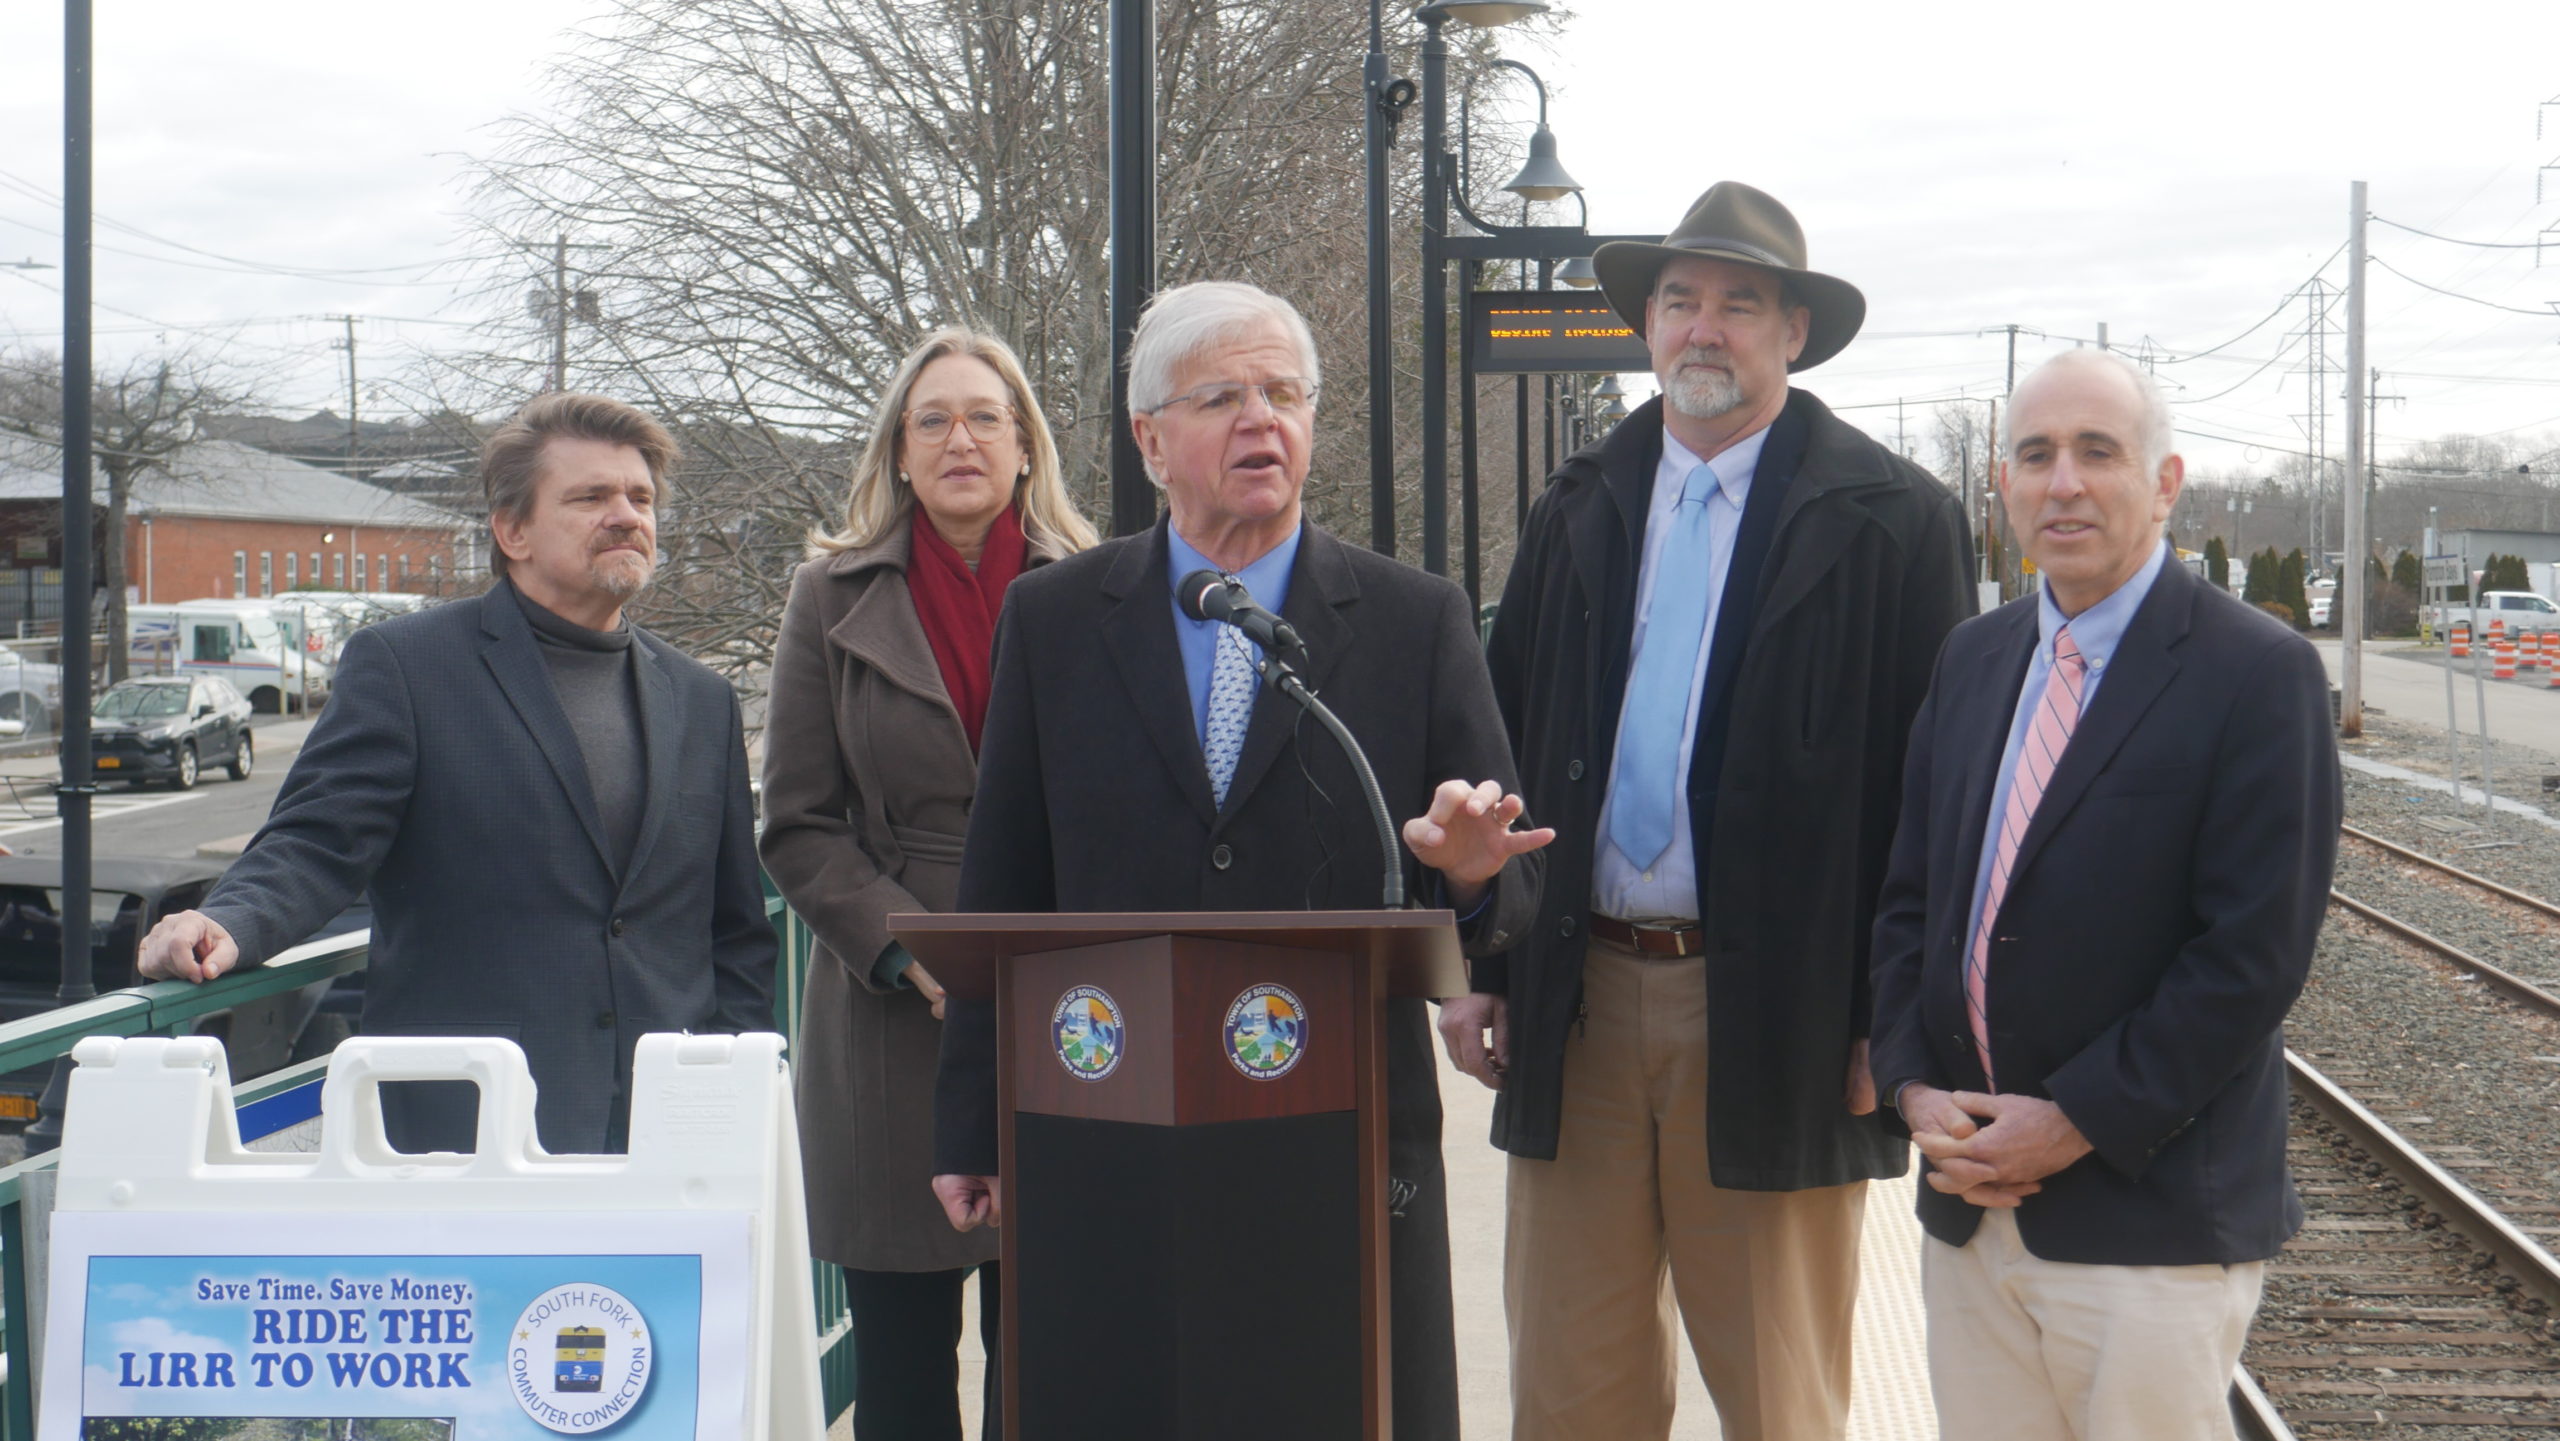 State Assemblyman Fred W. Thiele Jr. discusses the success of the South Fork Commuter Connection as Southampton Town Councilman Tommy John Schiavoni, Suffolk County Legislator Bridget Fleming, East Hampton Town Supervisor Peter Van Scoyoc, and Southampton Town Supervisor Jay Schneiderman look on. CONNIE CONWAY